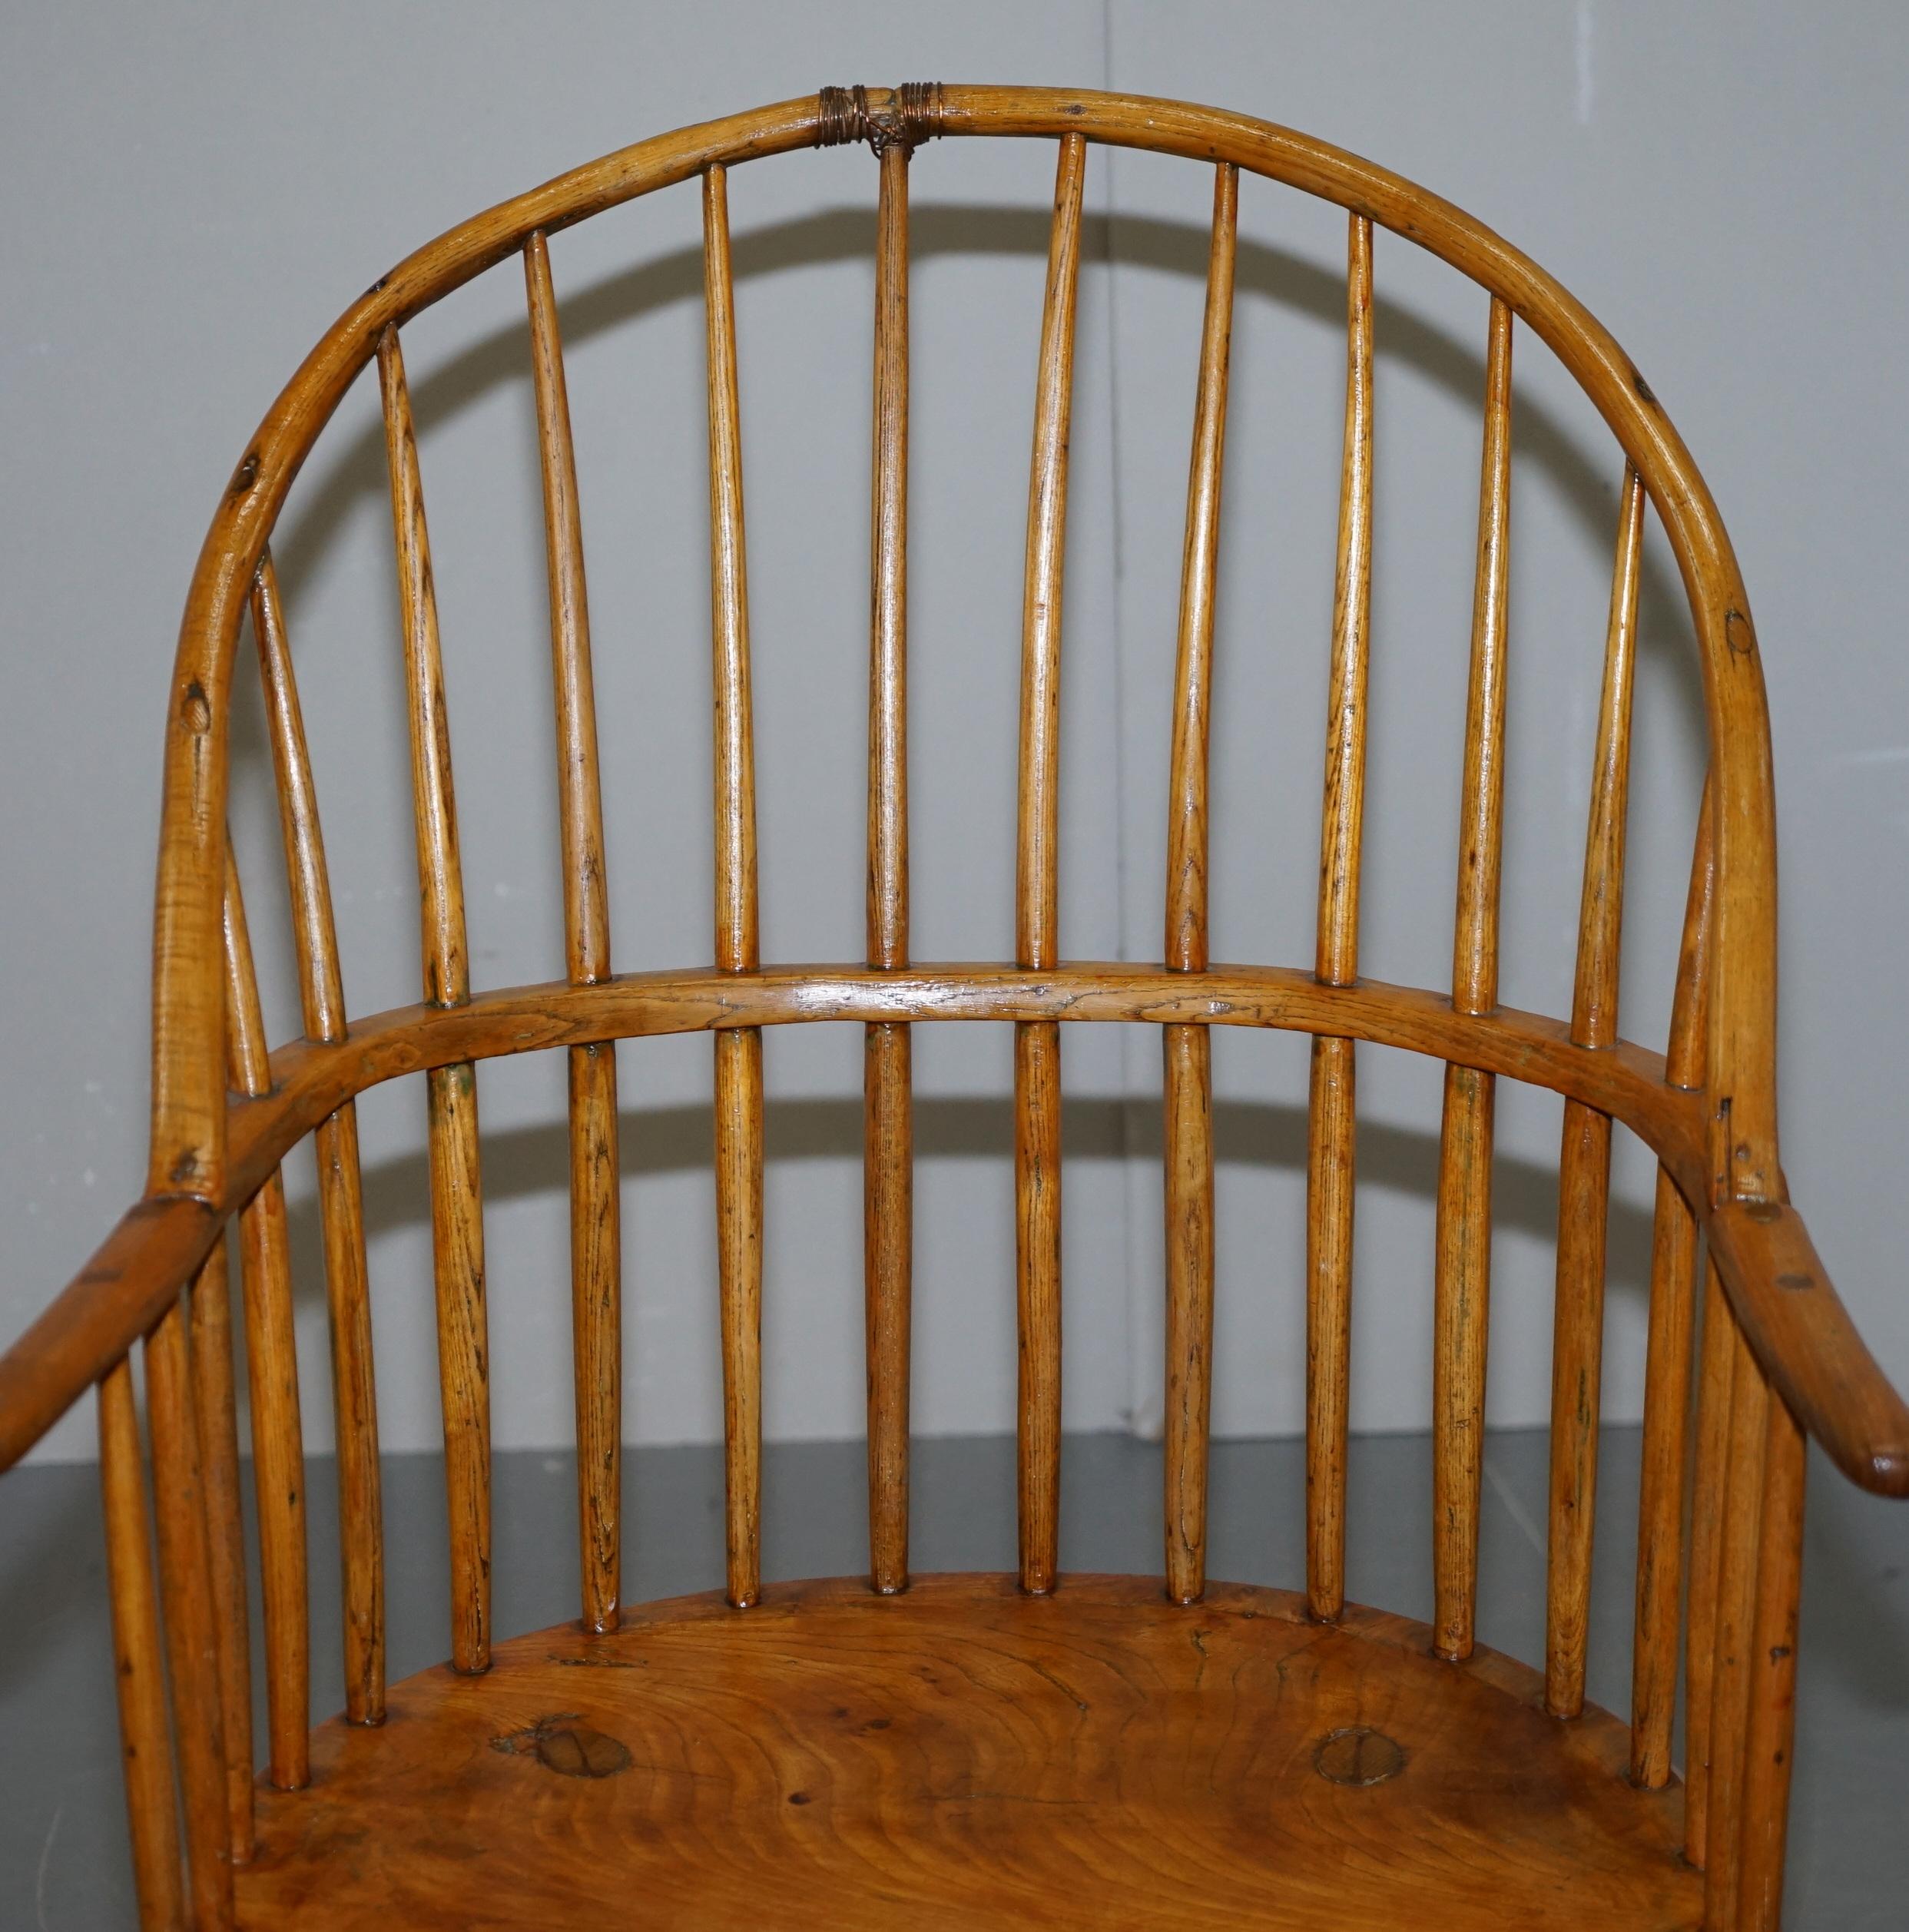 Hand-Crafted Stunning 18th Century Yew Wood Windsor Armchair Primate Design Stick Back For Sale